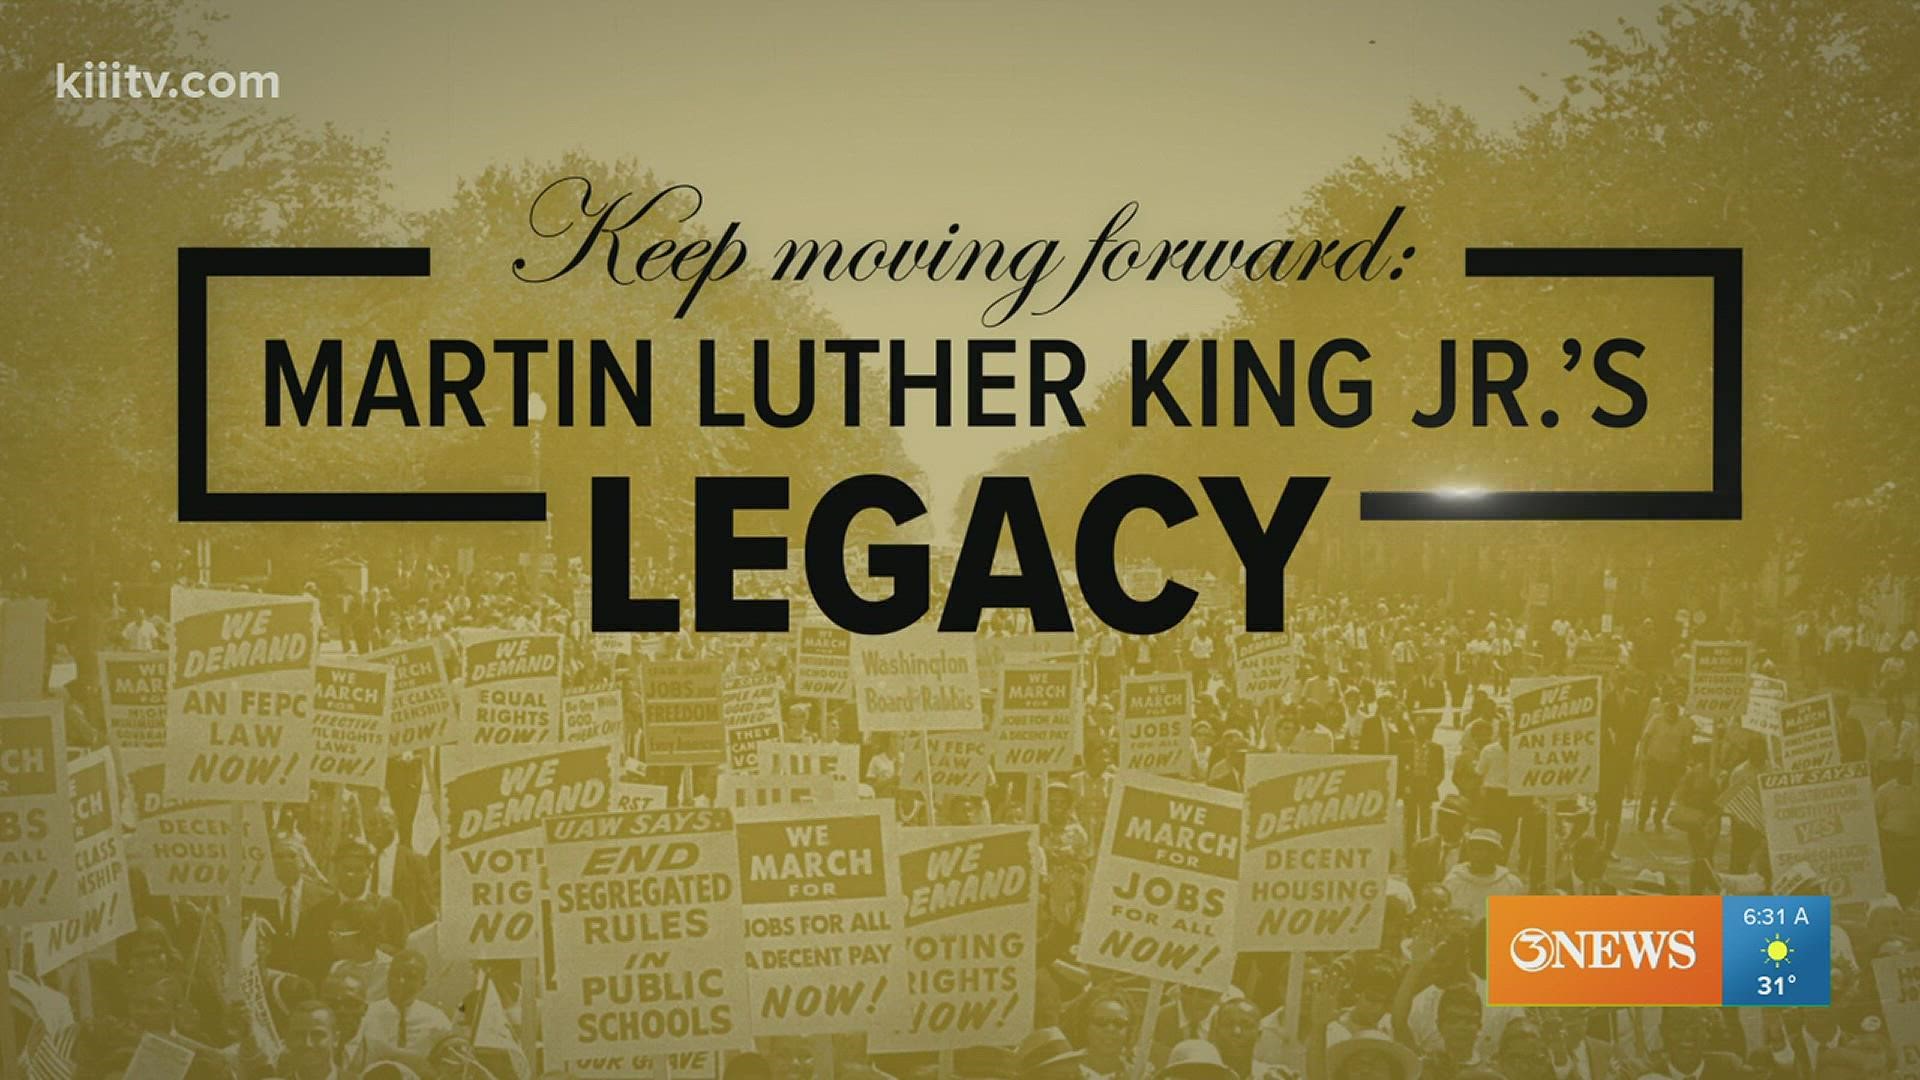 From Corpus Christi to the city of Alice there are plenty of celebrations you can be part of today honoring Dr. King.